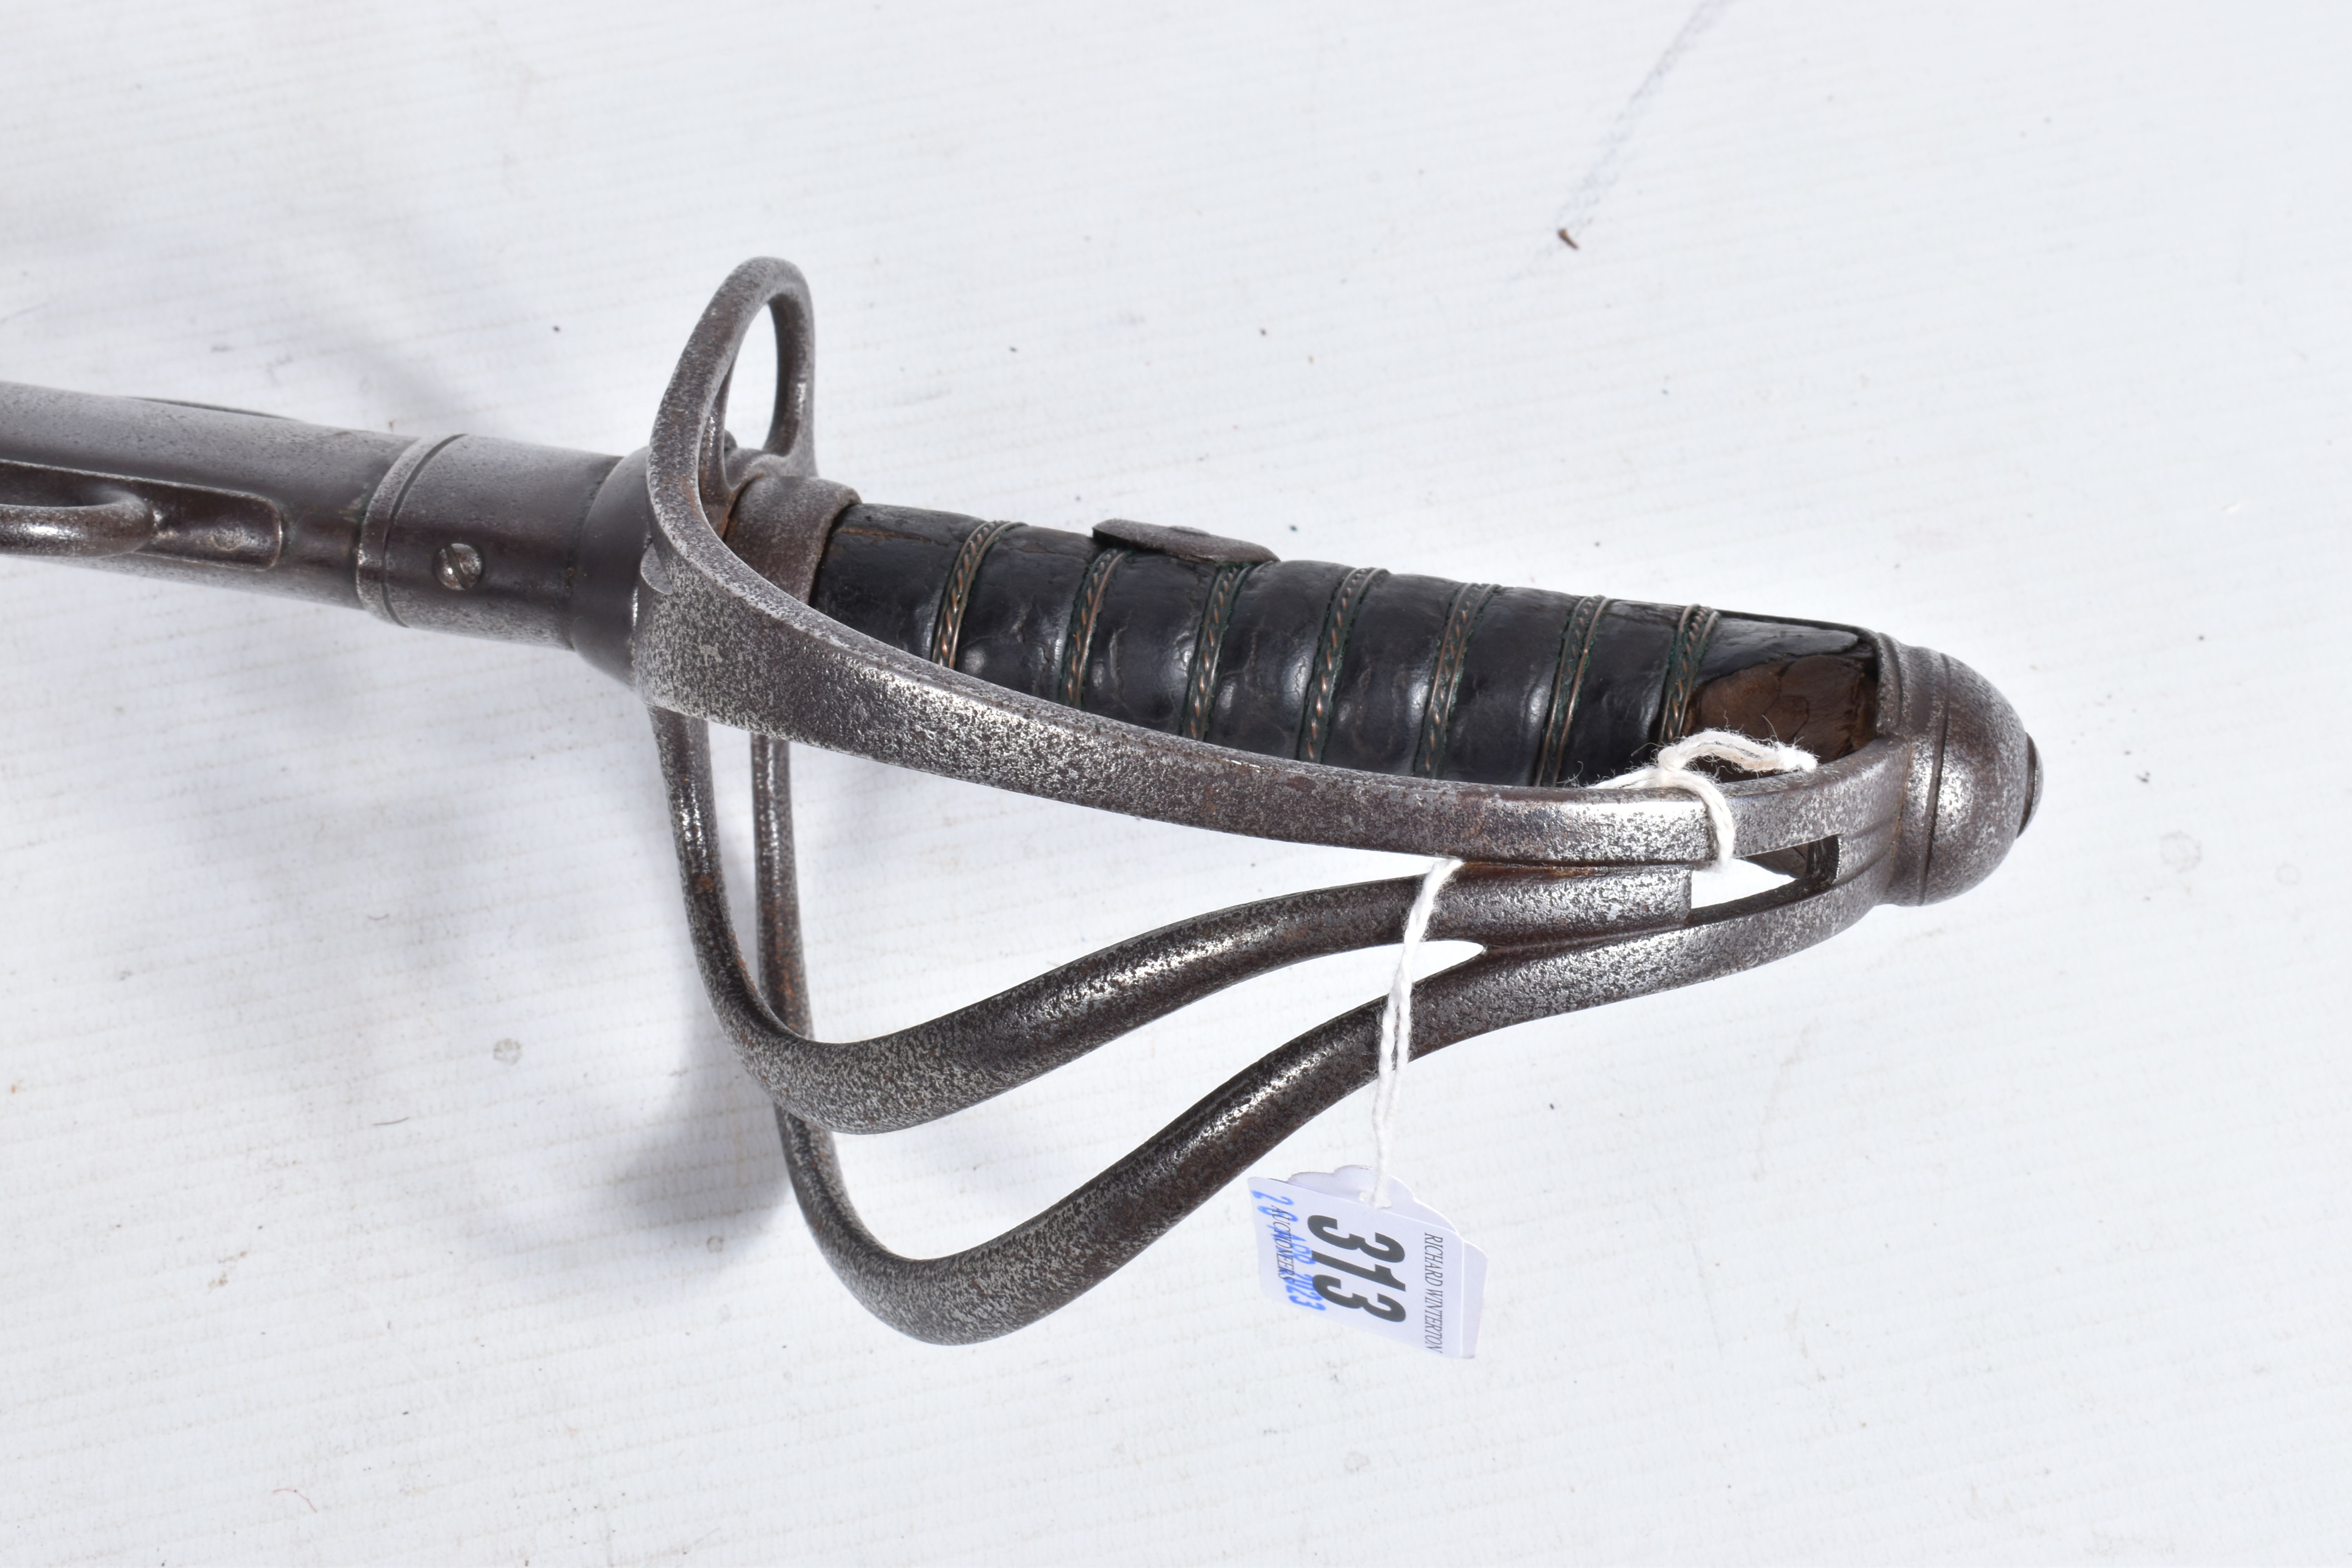 AN EARLY TWENTIETH CENTURY SWORD WITH METAL SCABBARD, there are no markings on the blade or - Image 4 of 8